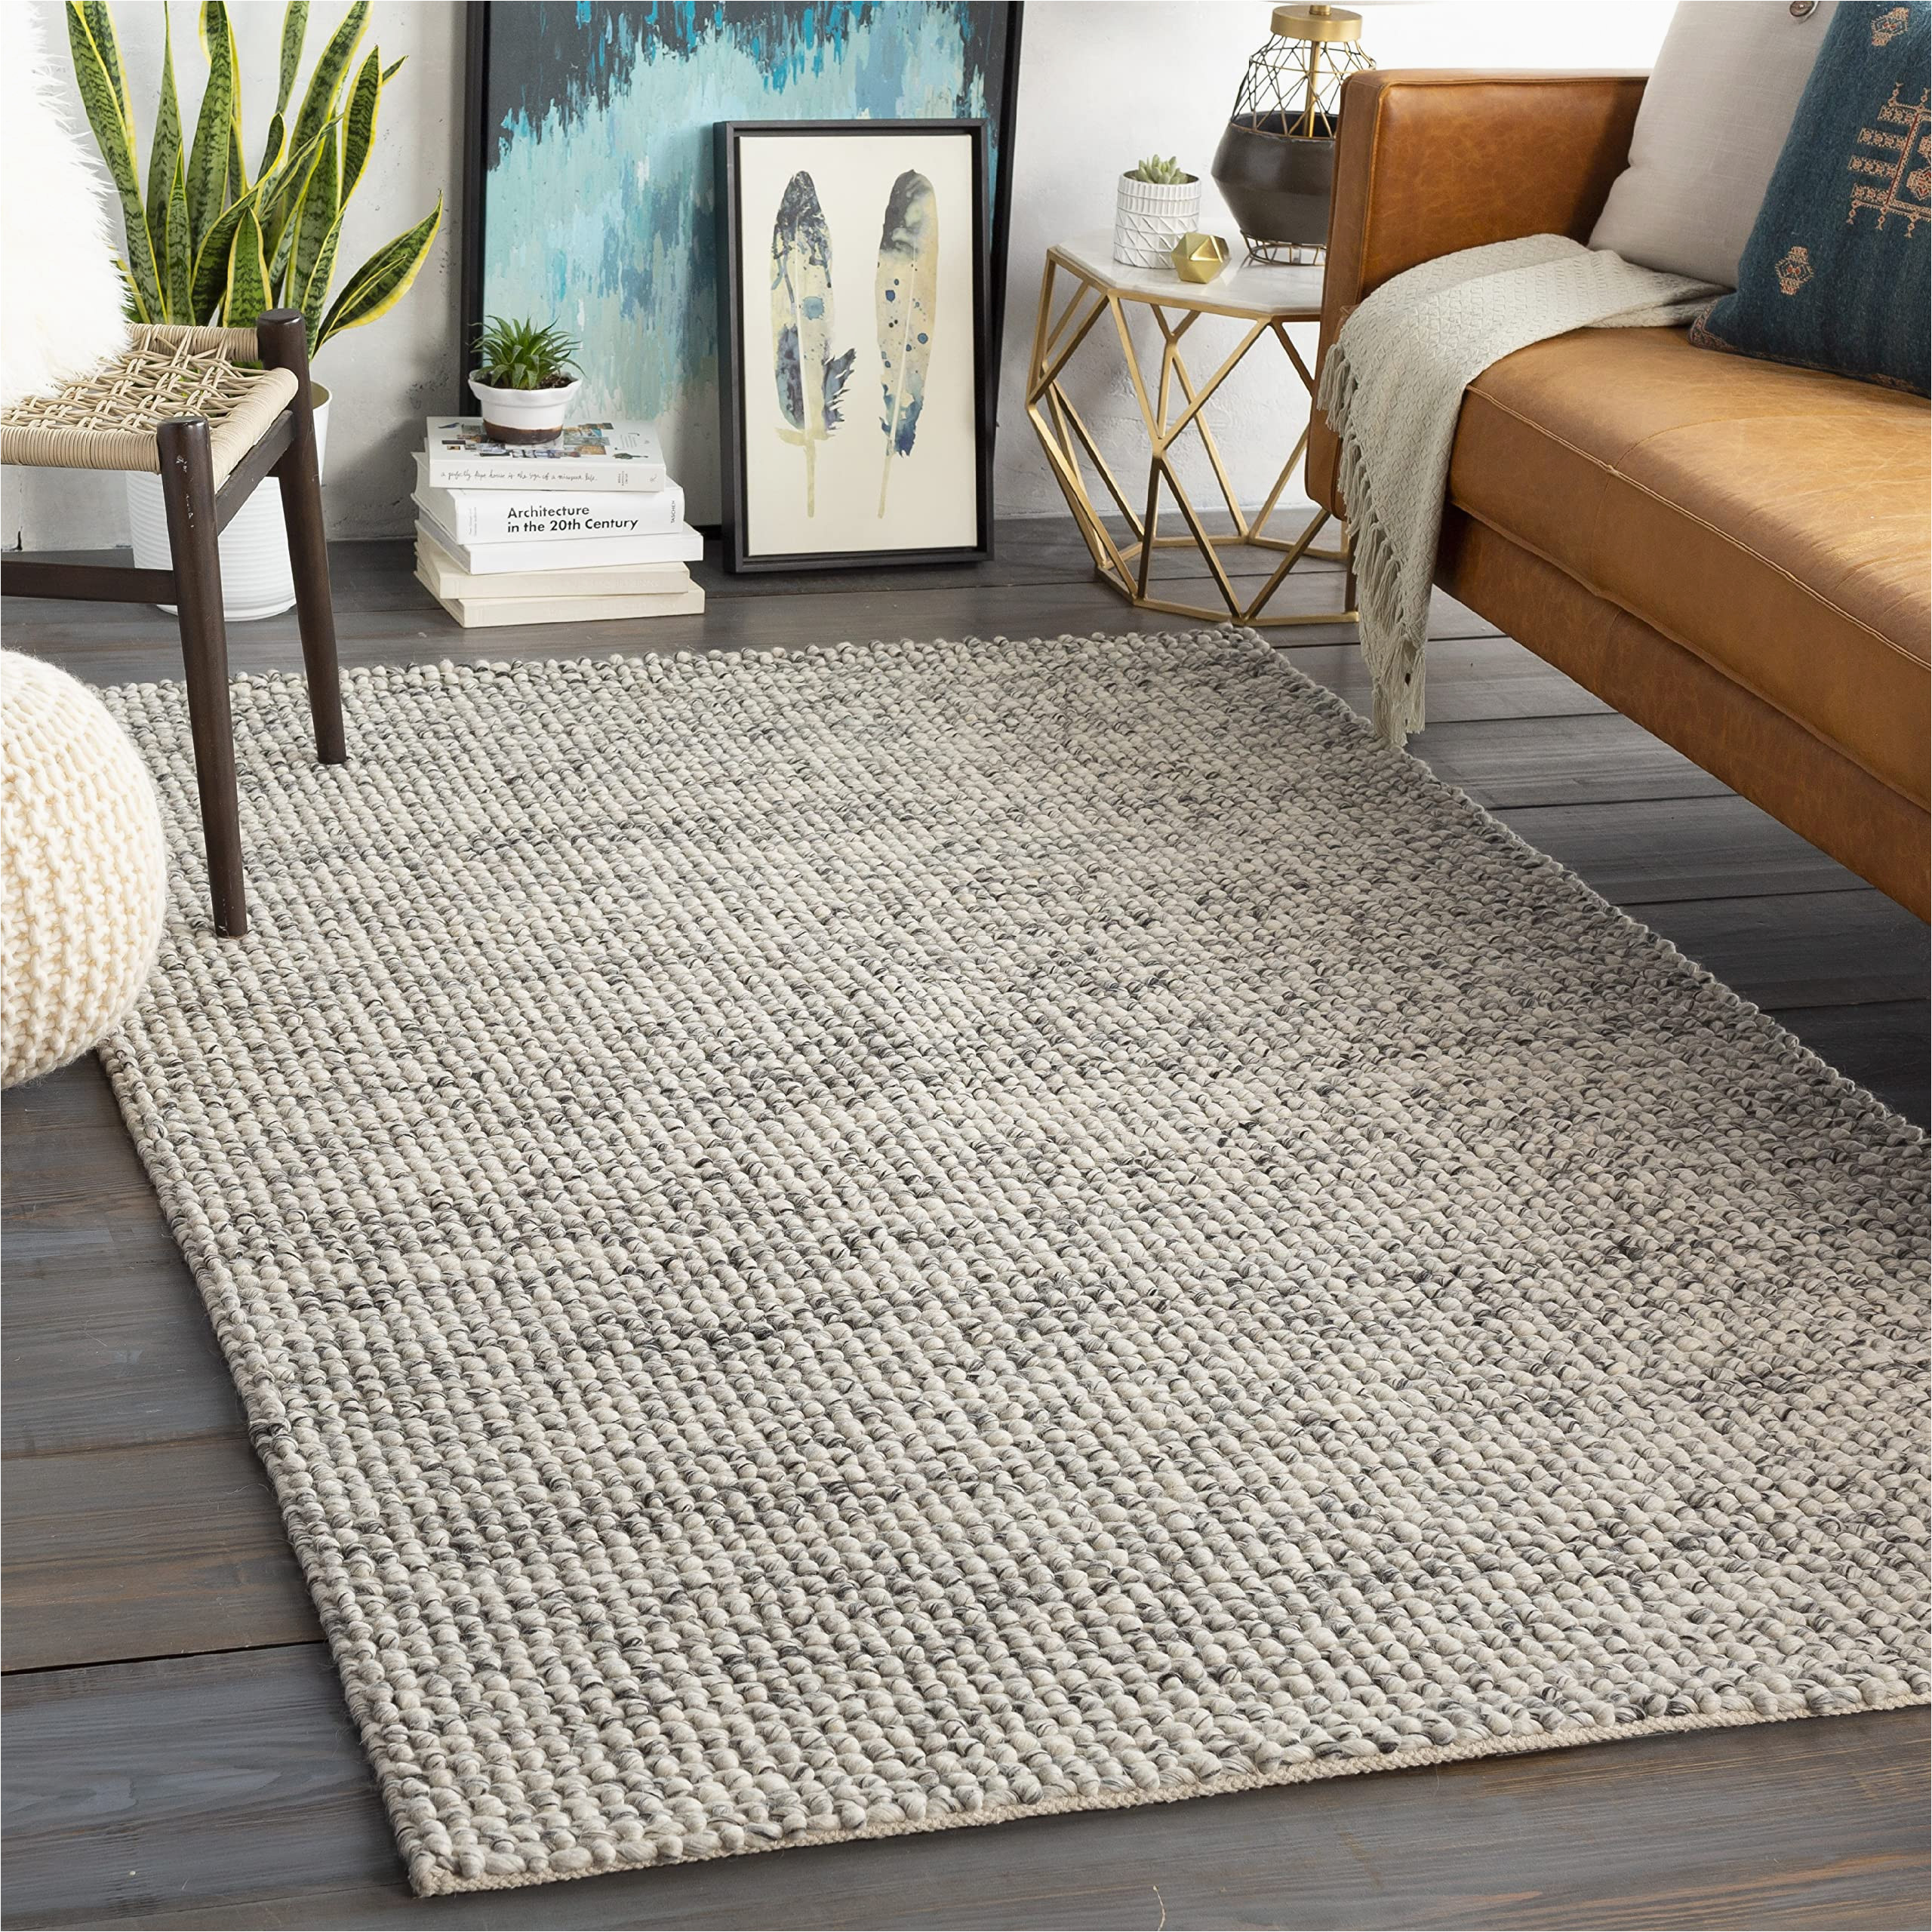 Gray Wool area Rug 8×10 Mark&day area Rugs, 8×10 Keynsham Texture Charcoal area Rug, White / Beige / Black Carpet for Living Room, Bedroom or Kitchen (8′ X 10′)